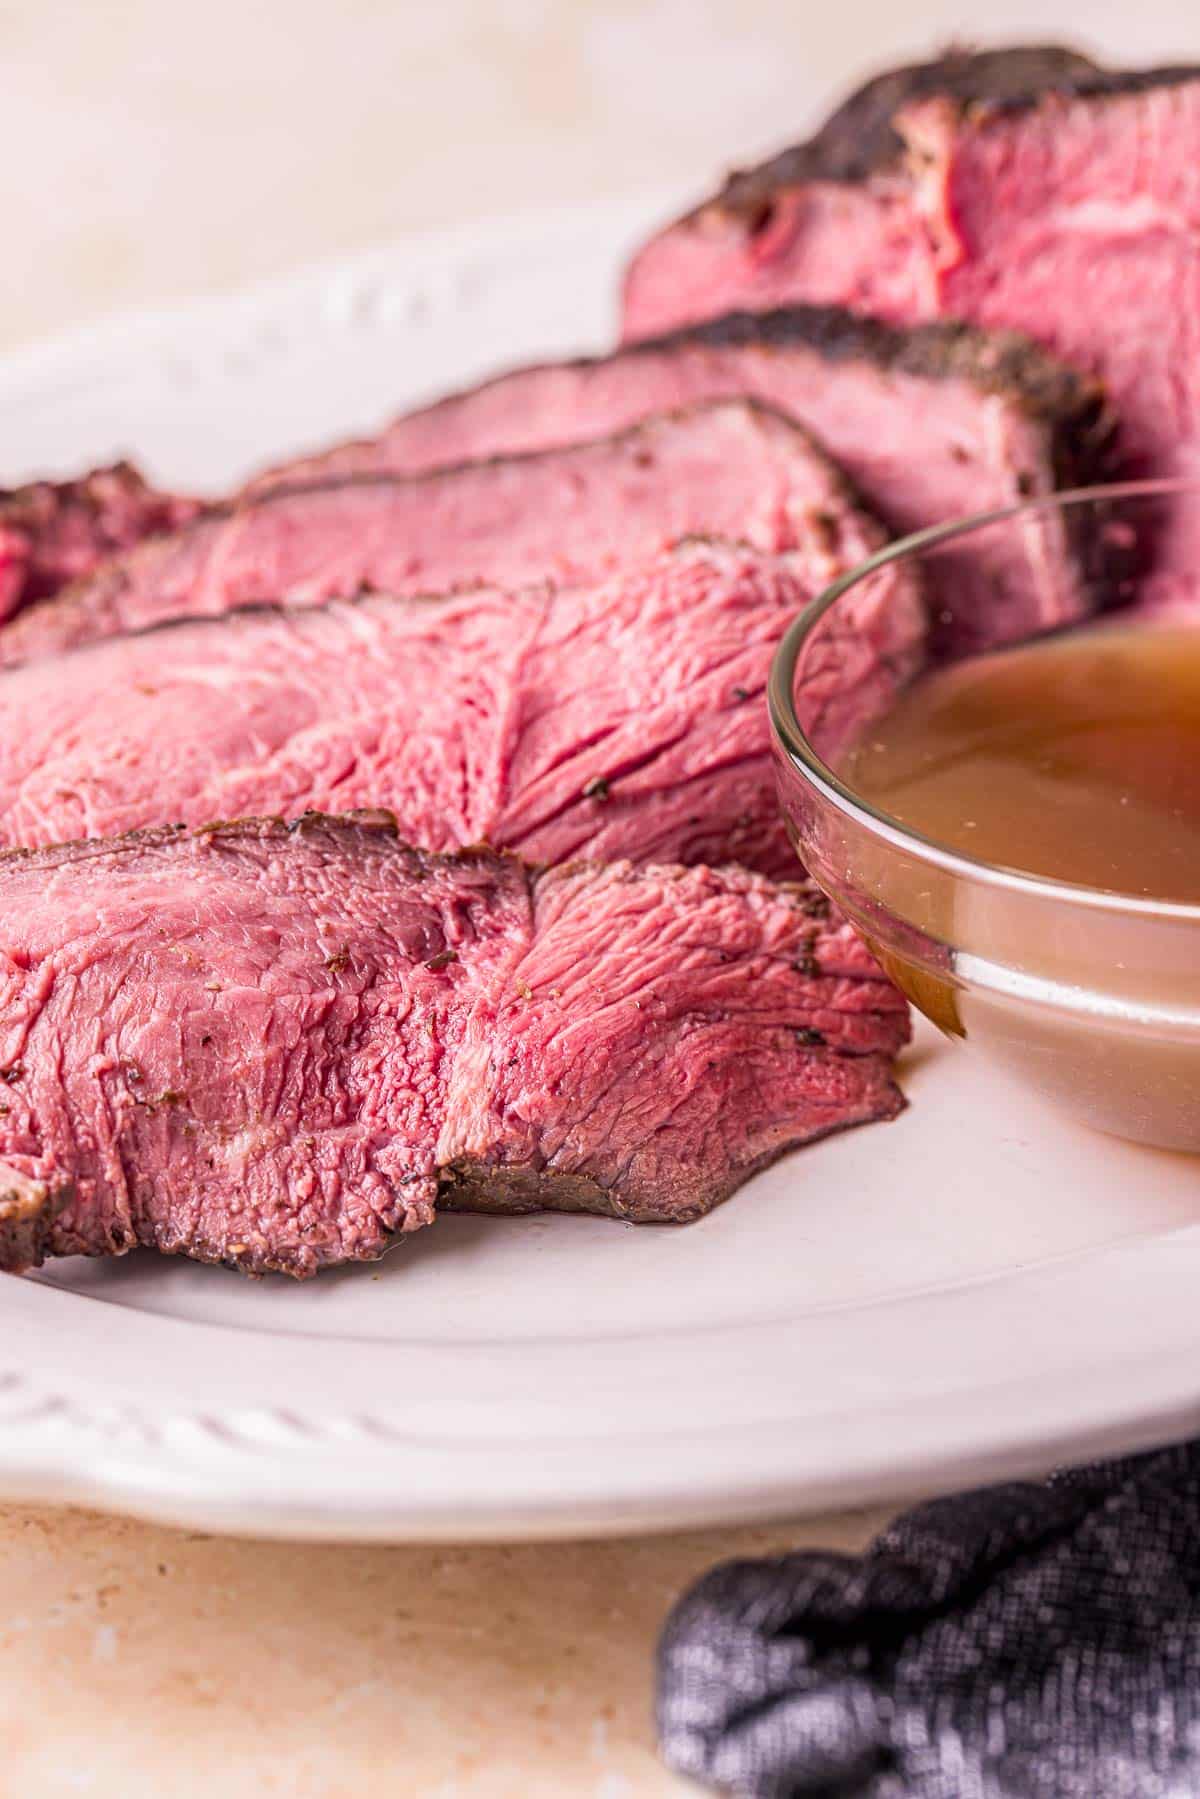 sliced of rare beef on a plate with jus on the side